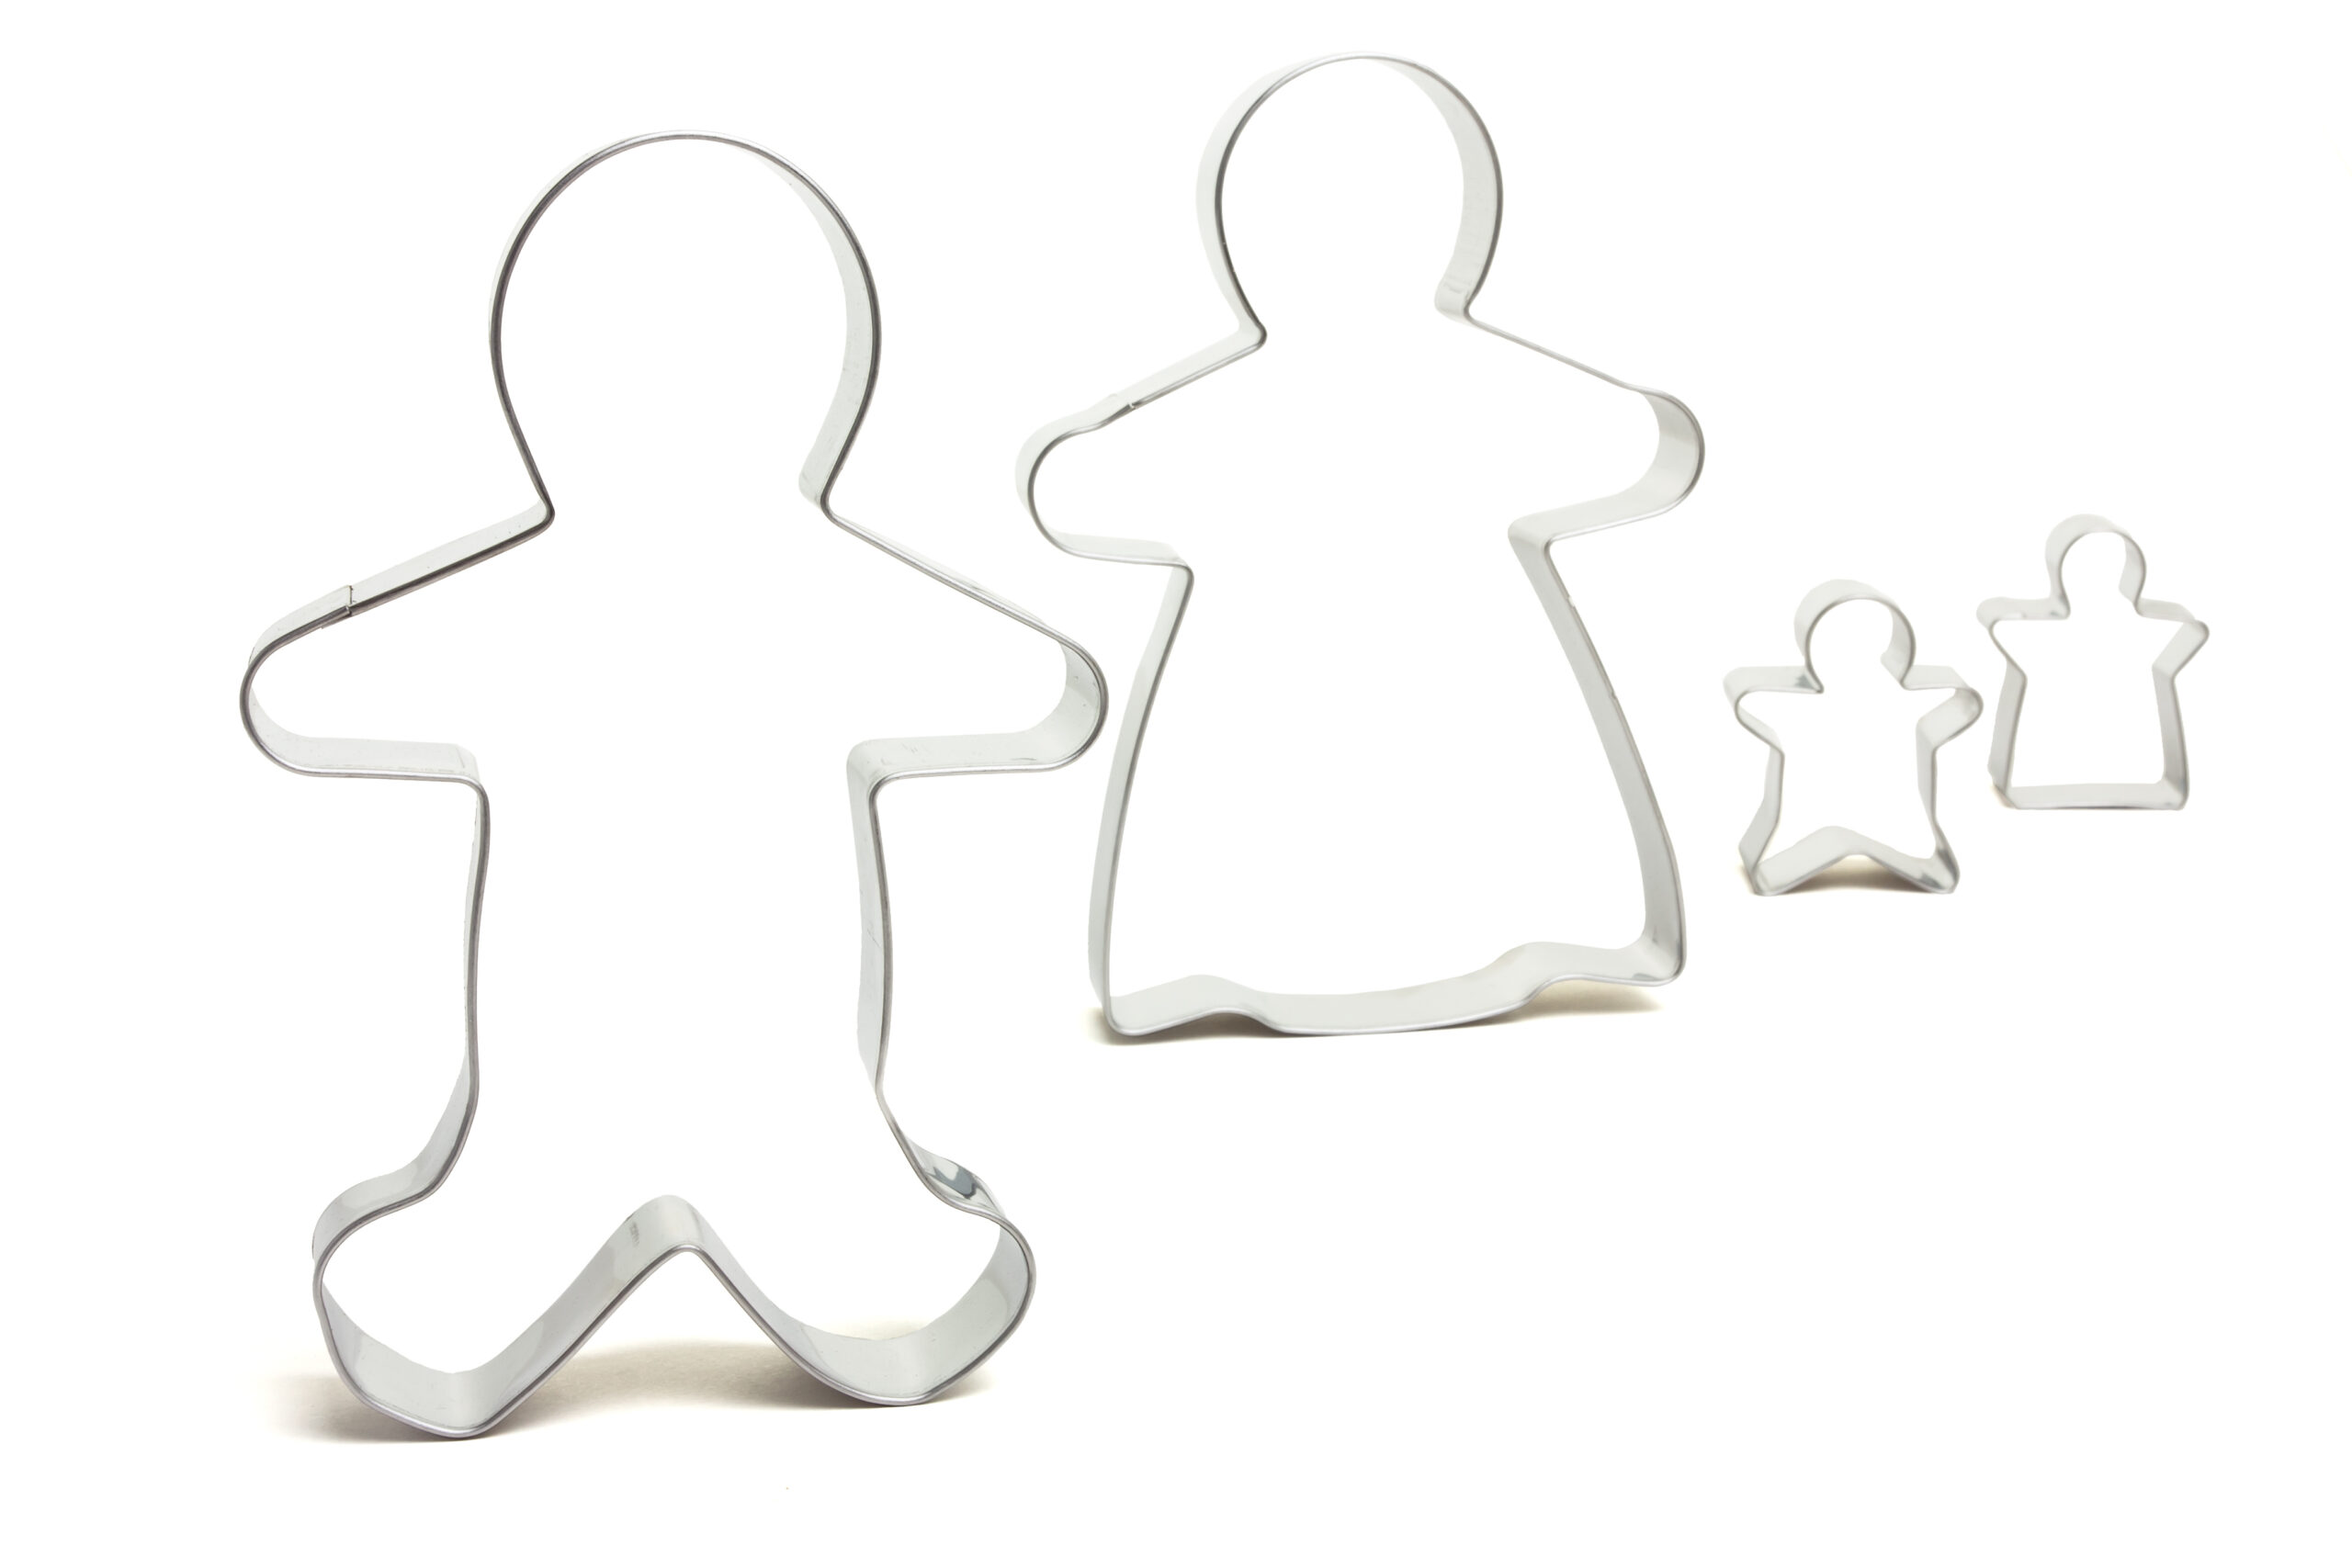 The cookie cutter family according to the white American culture.